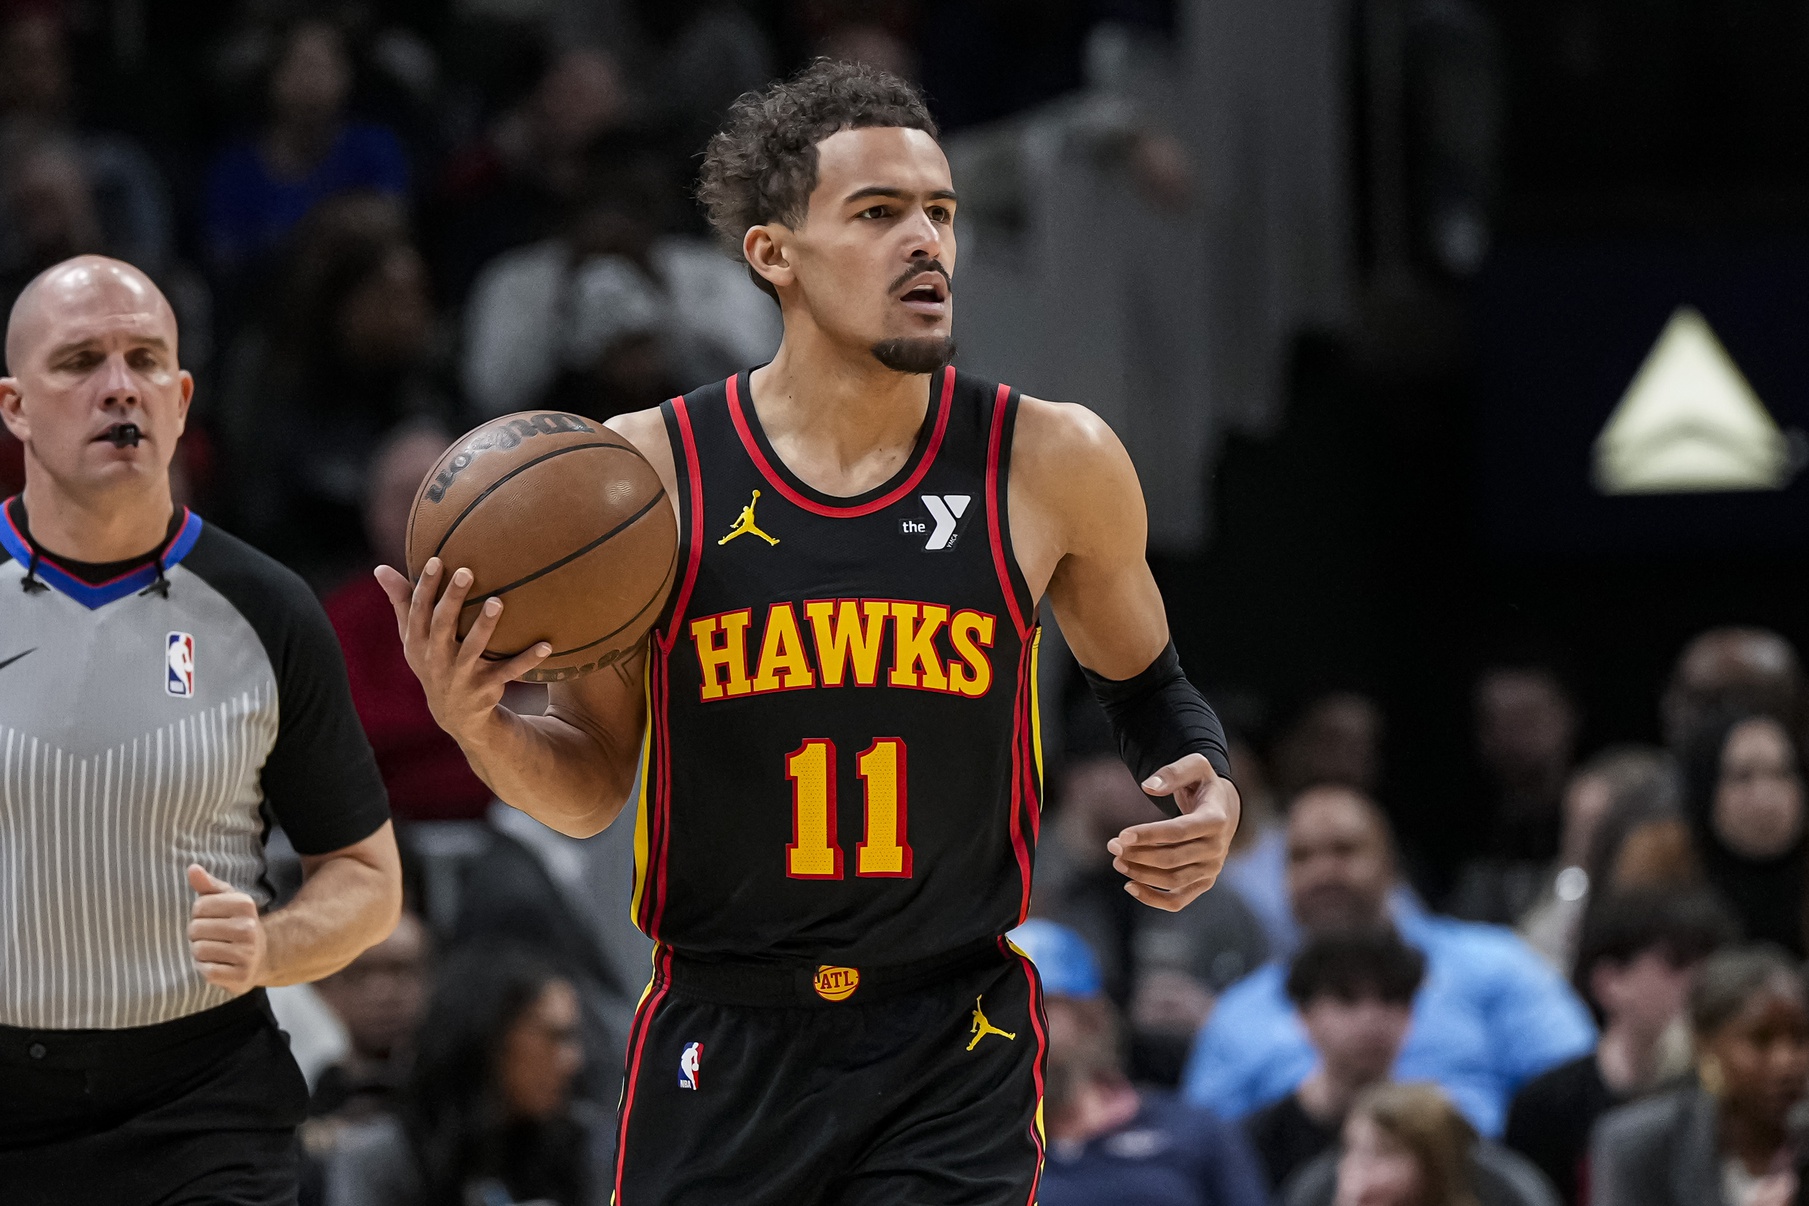 The Trae Young trade rumors are starting to ramp up